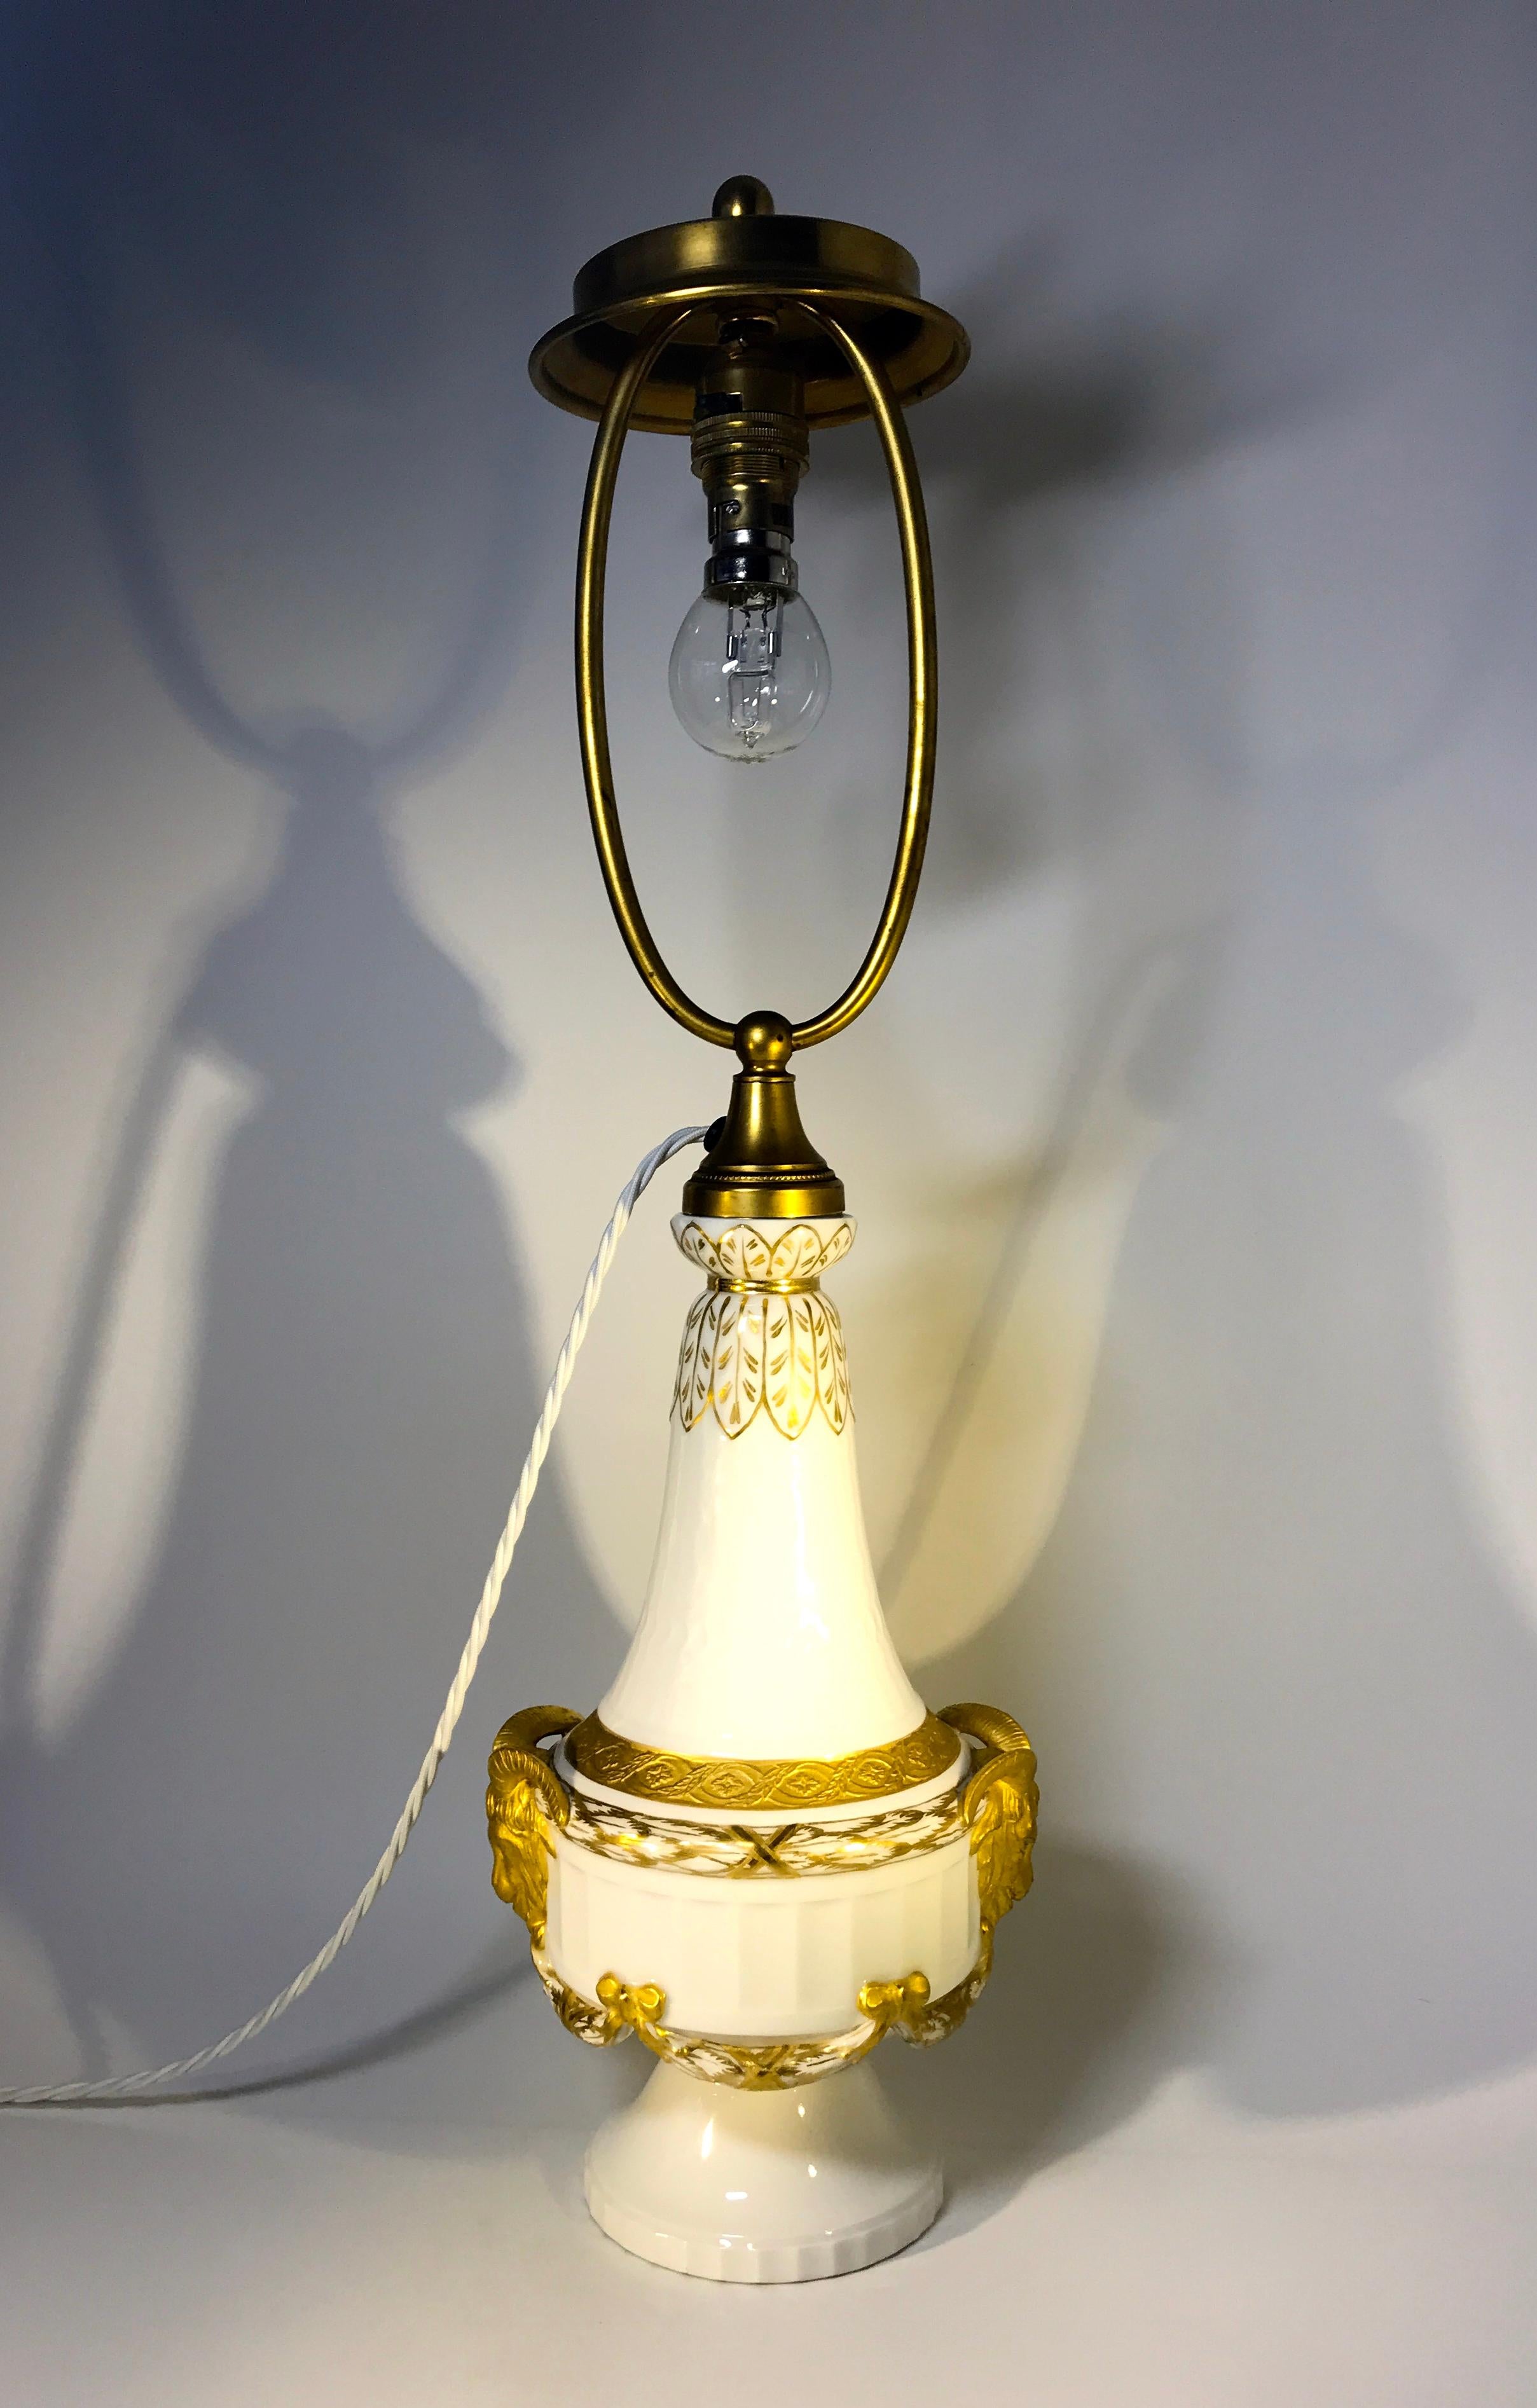 Fabulous Royal Copenhagen XVI style, white porcelain table lamp dated between 1889-1922, in superb condition
Sumptuously decorated with gilded swags, rams heads and bows
Dated 1889-1922
Signed and Numbered 11537
Measures: Height 22.5 inch,